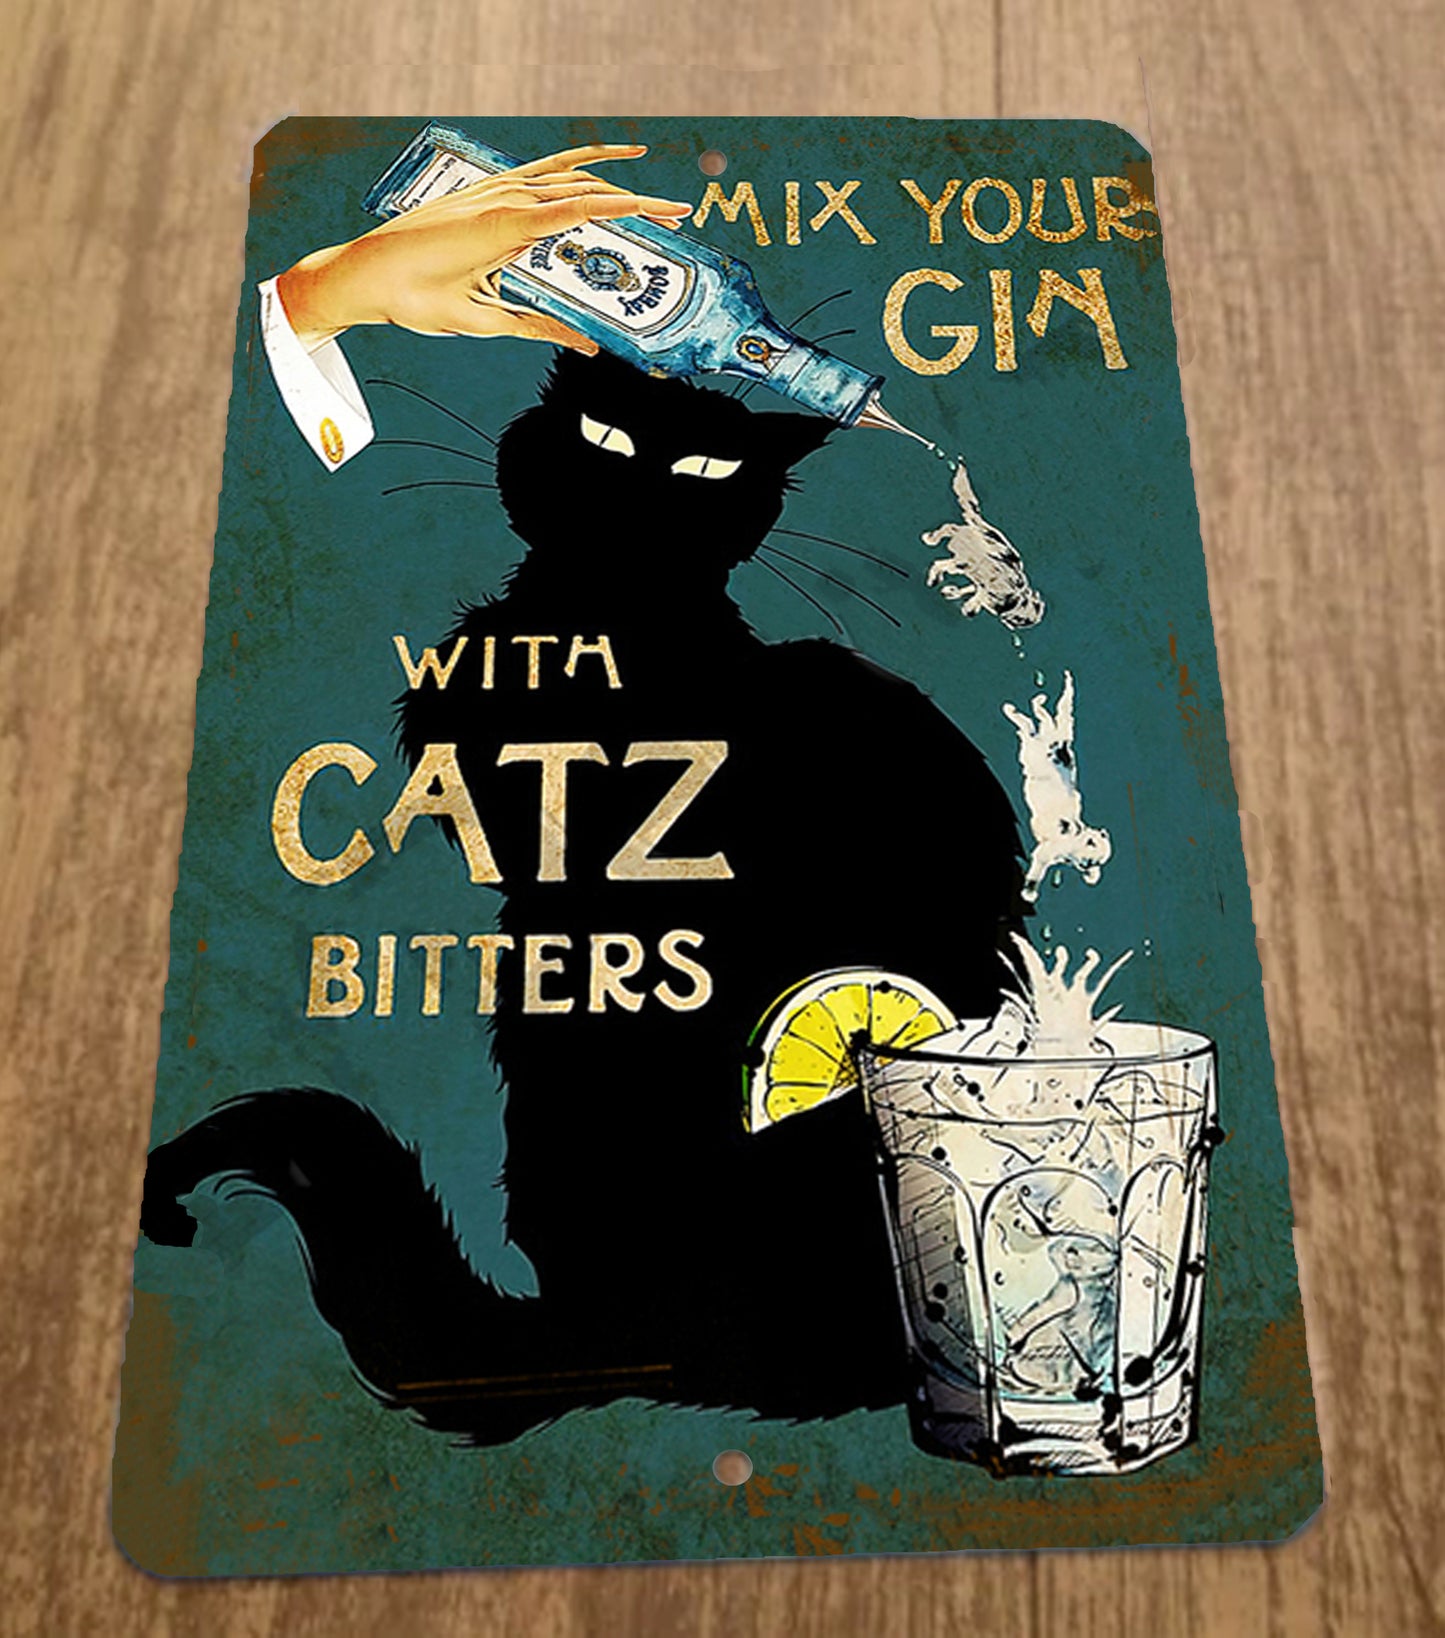 Mix Your Gin with Catz Biters 8x12 Metal Wall Bar Sign Animals